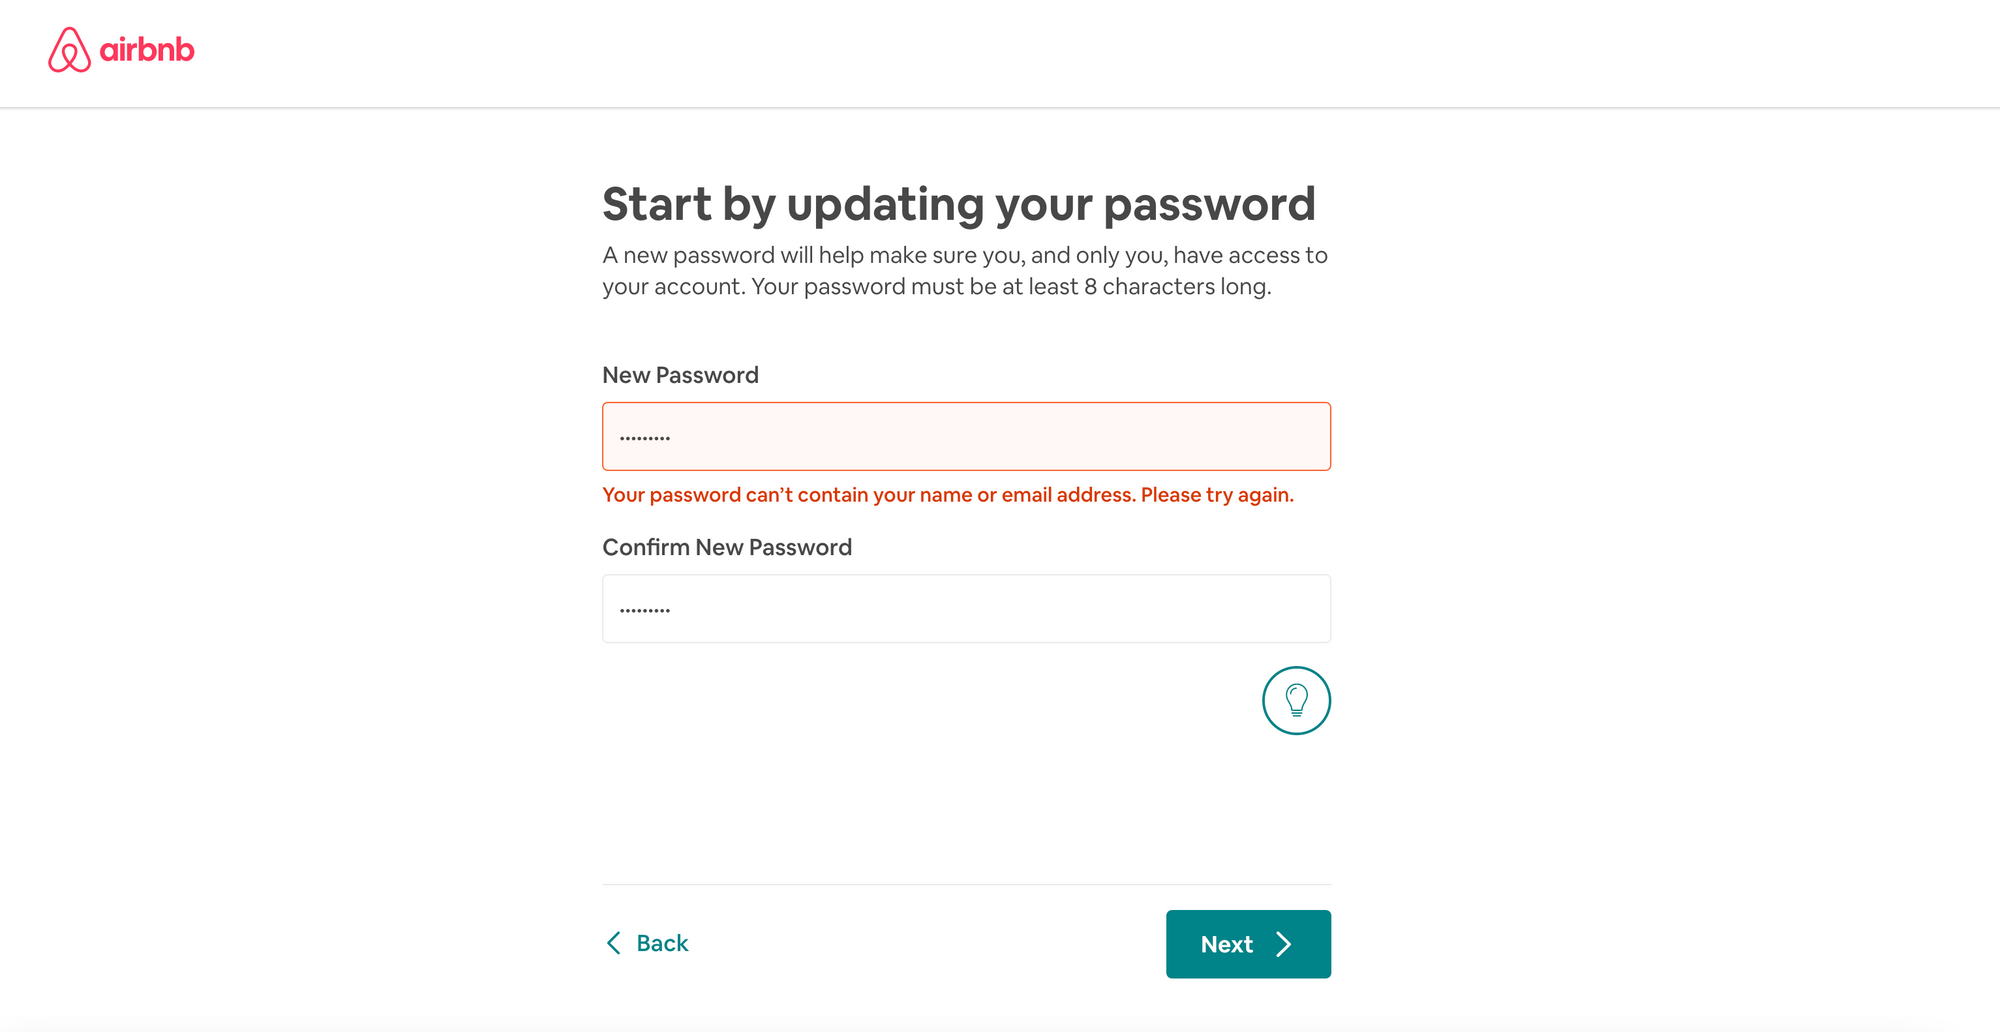 Your password can’t contain your name or email address